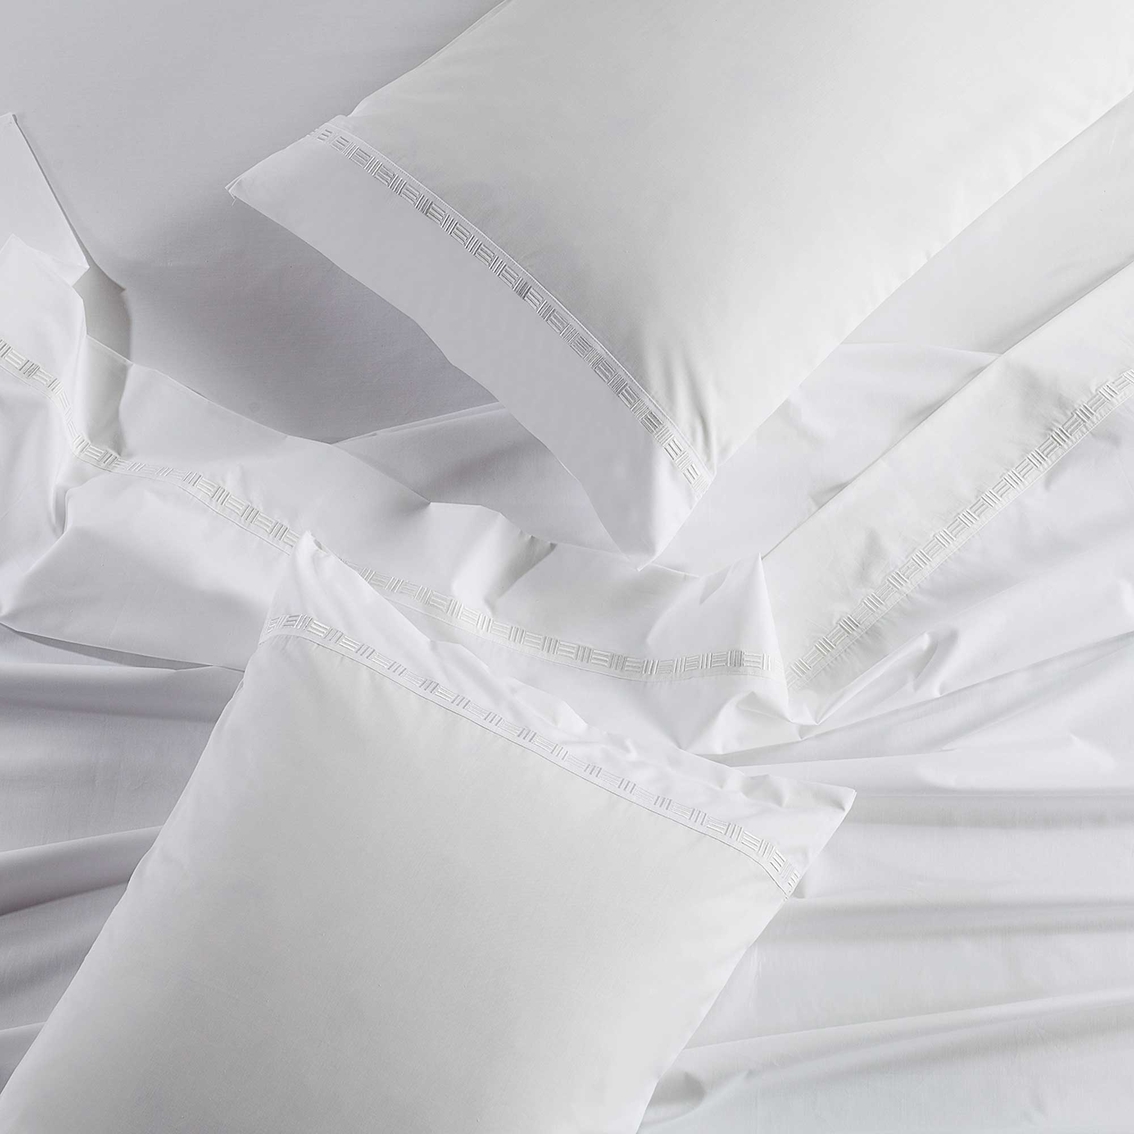 Hotel Grand Tencel Lyocell and Cotton Blend Embroidered Hotel Sheet Set - Image 4 of 4